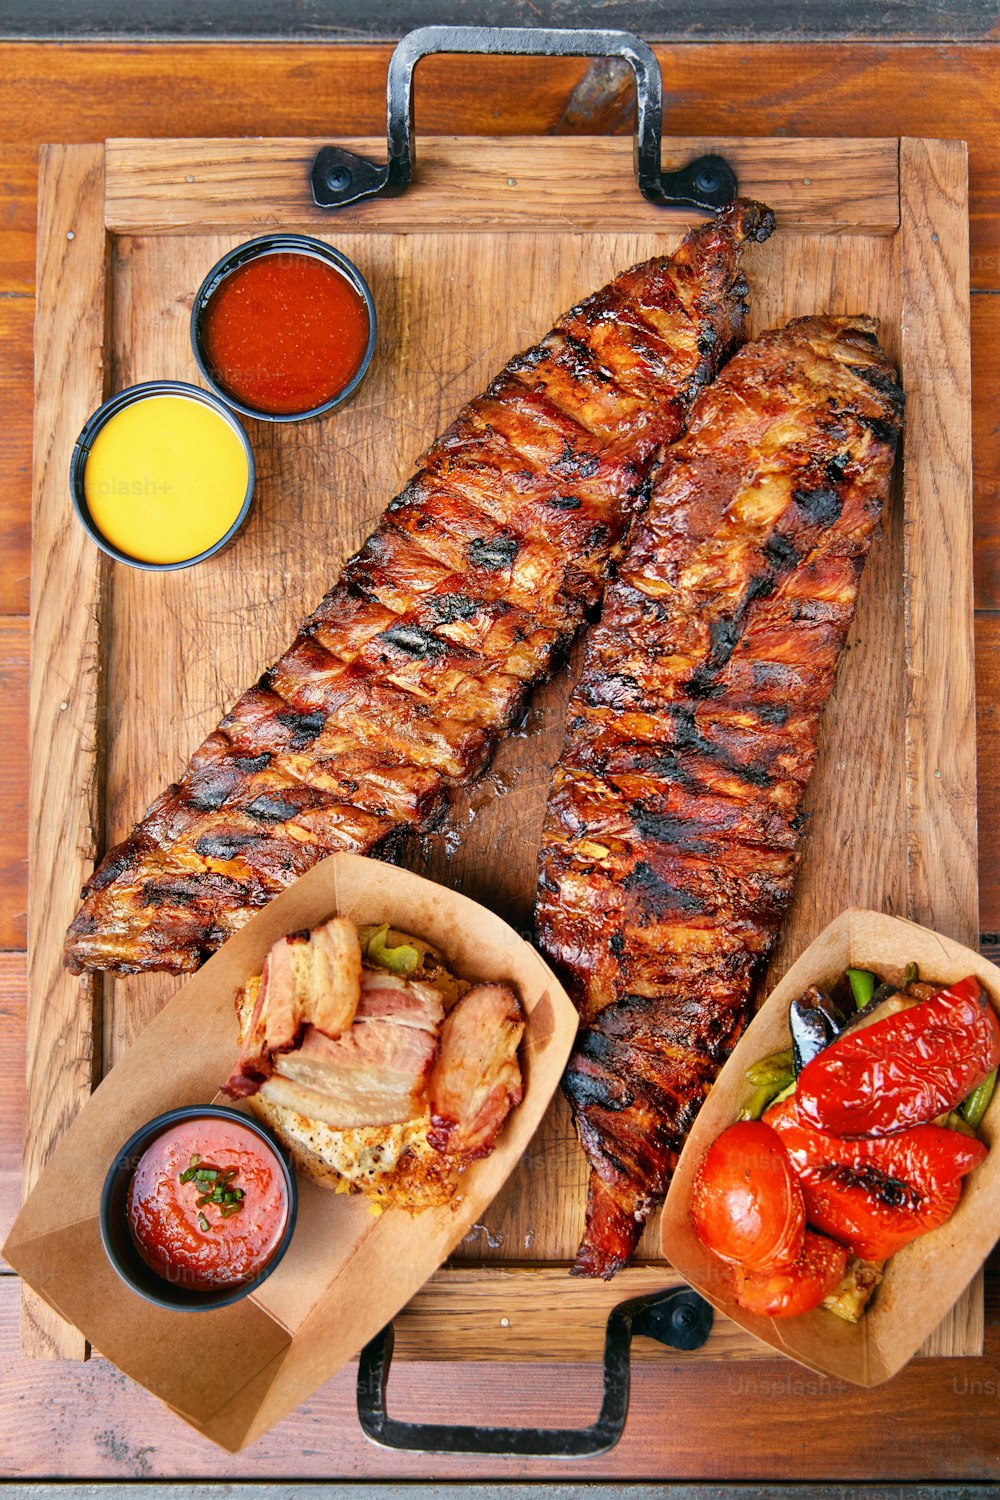 Food Closeup. Grilled Ribs In Barbecue Restaurant. Spareribs With Vegetables And Sauce On Wooden Tray. High Resolution